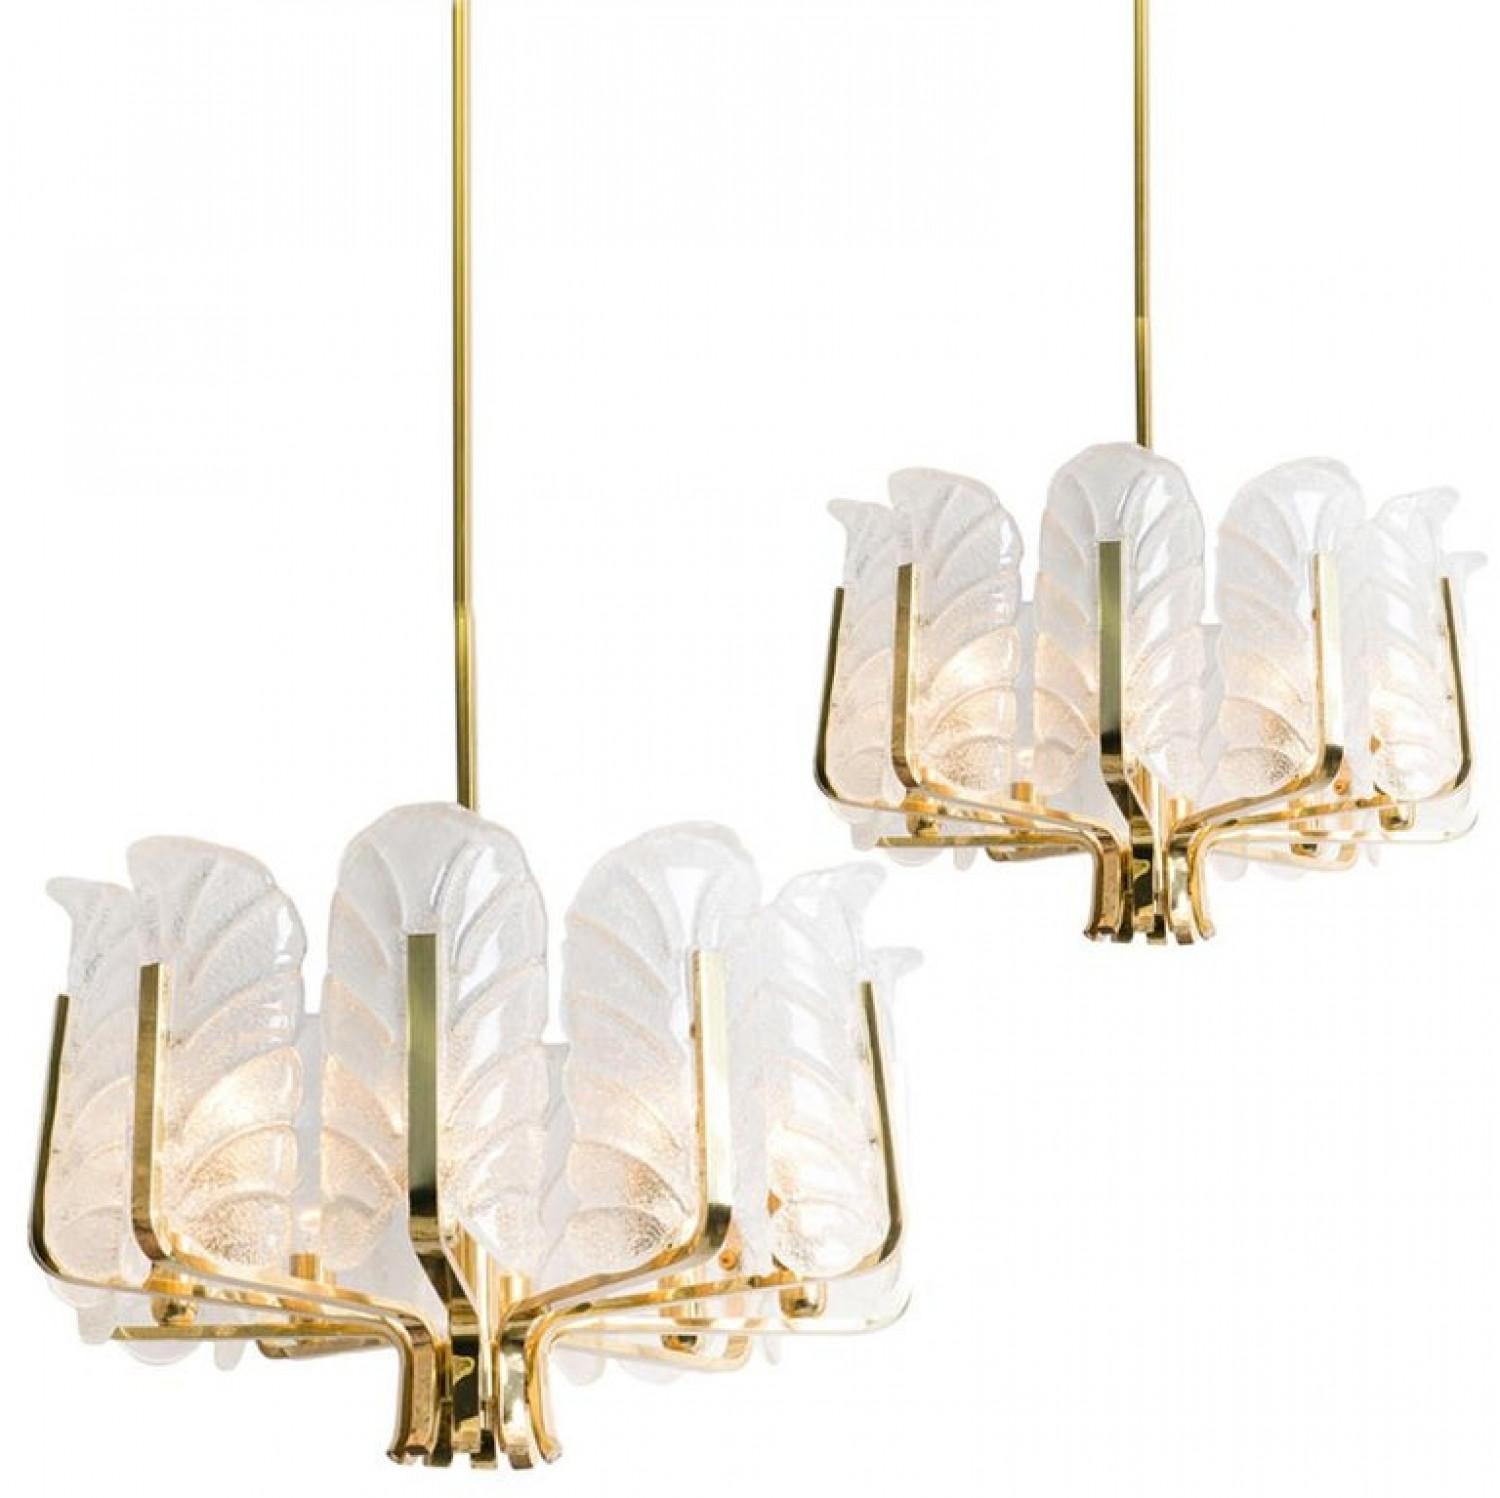 1 of the 5 Pair of Brass Wall Scones by Fagerlund for Orrefors, 1960 4